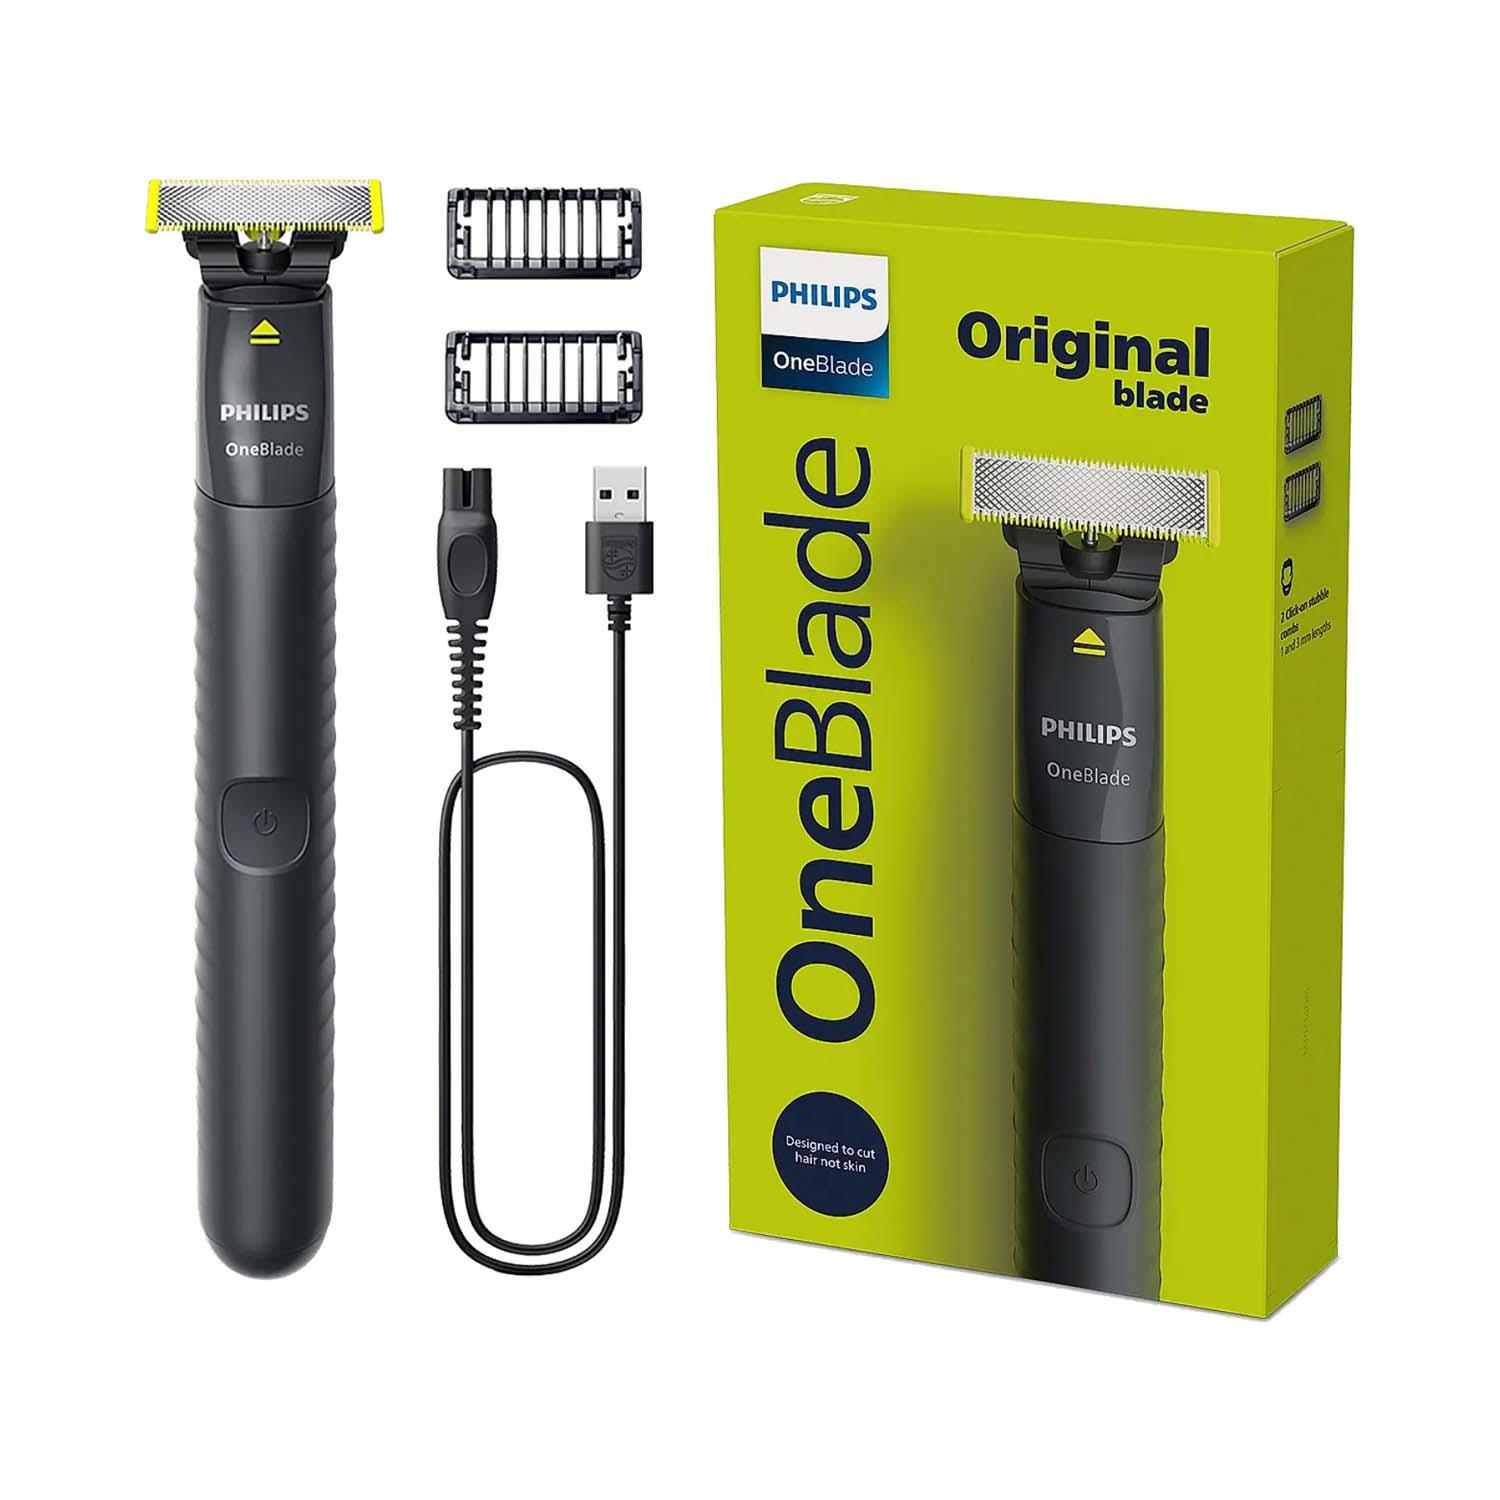 Philips | Philips Qp1424/10 One Blade Shaving Trimmer